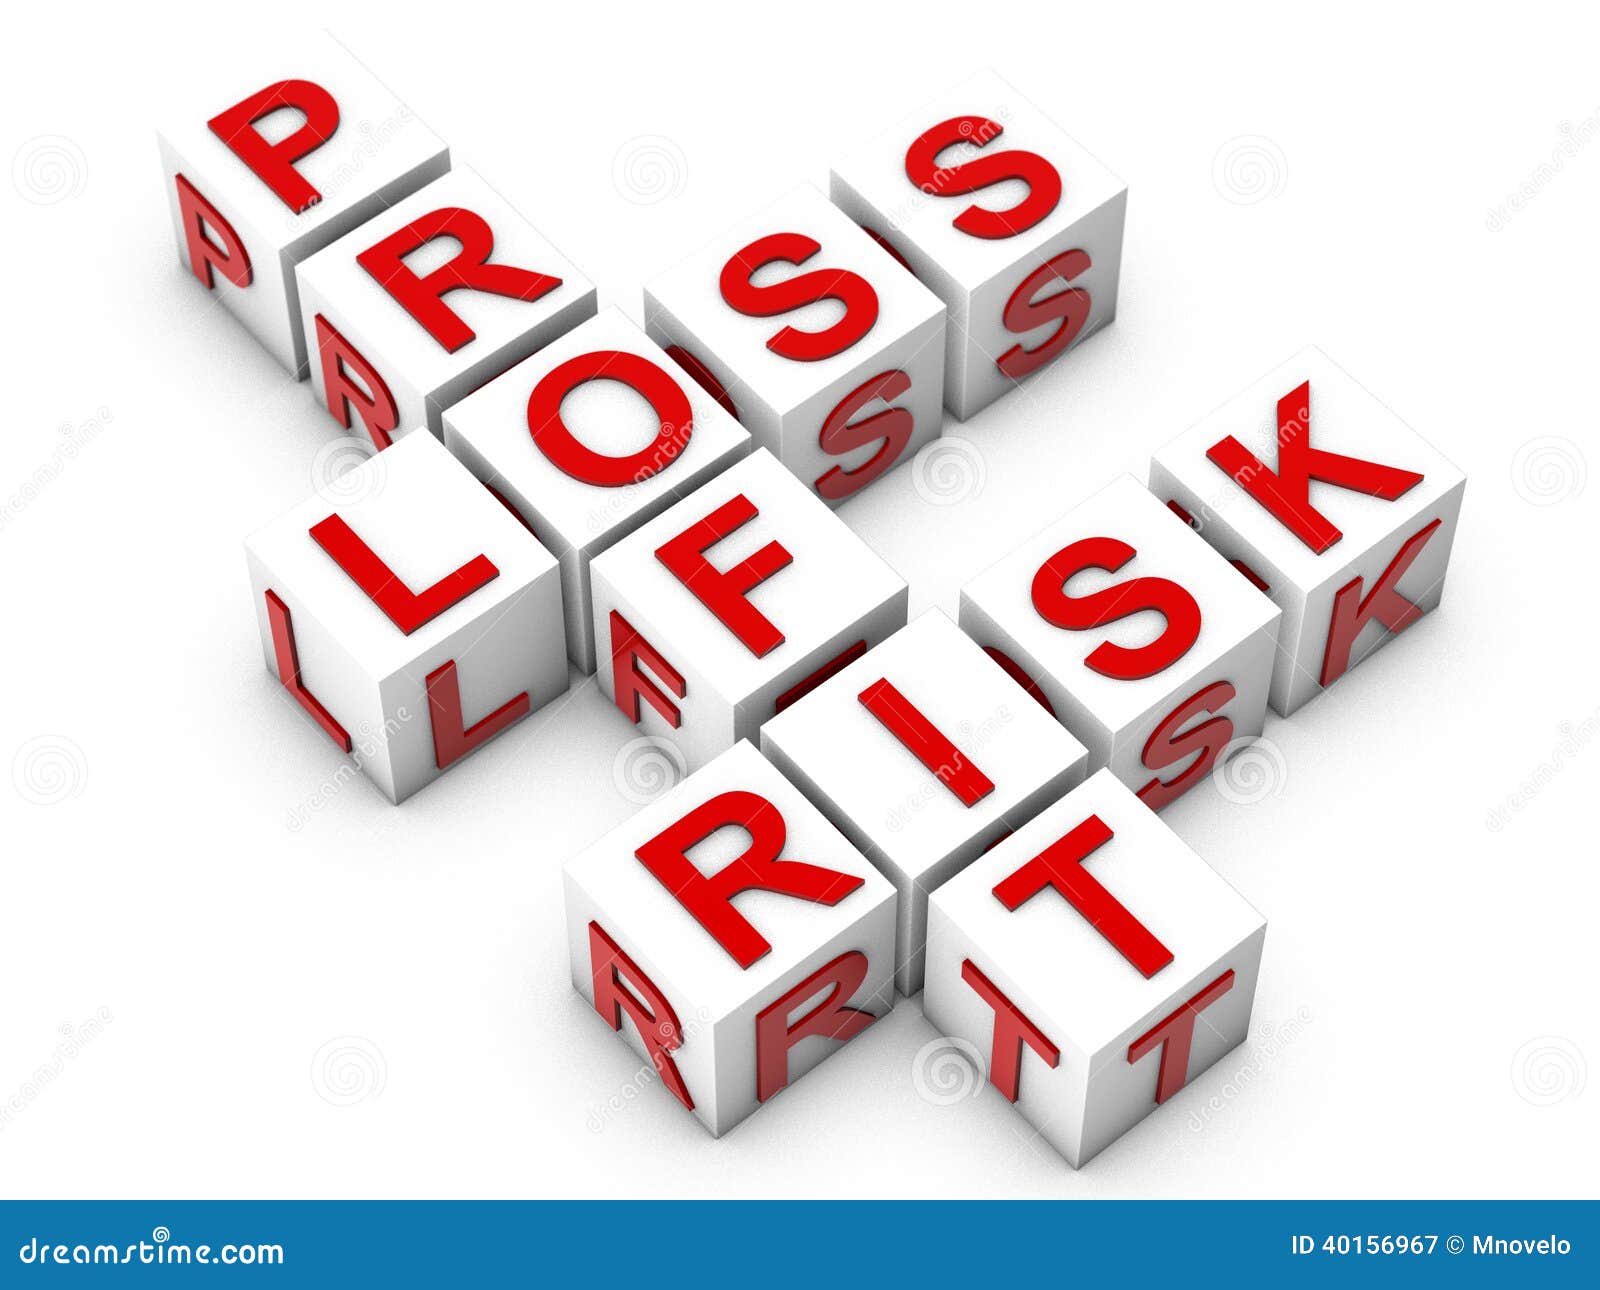 profit loos and risk